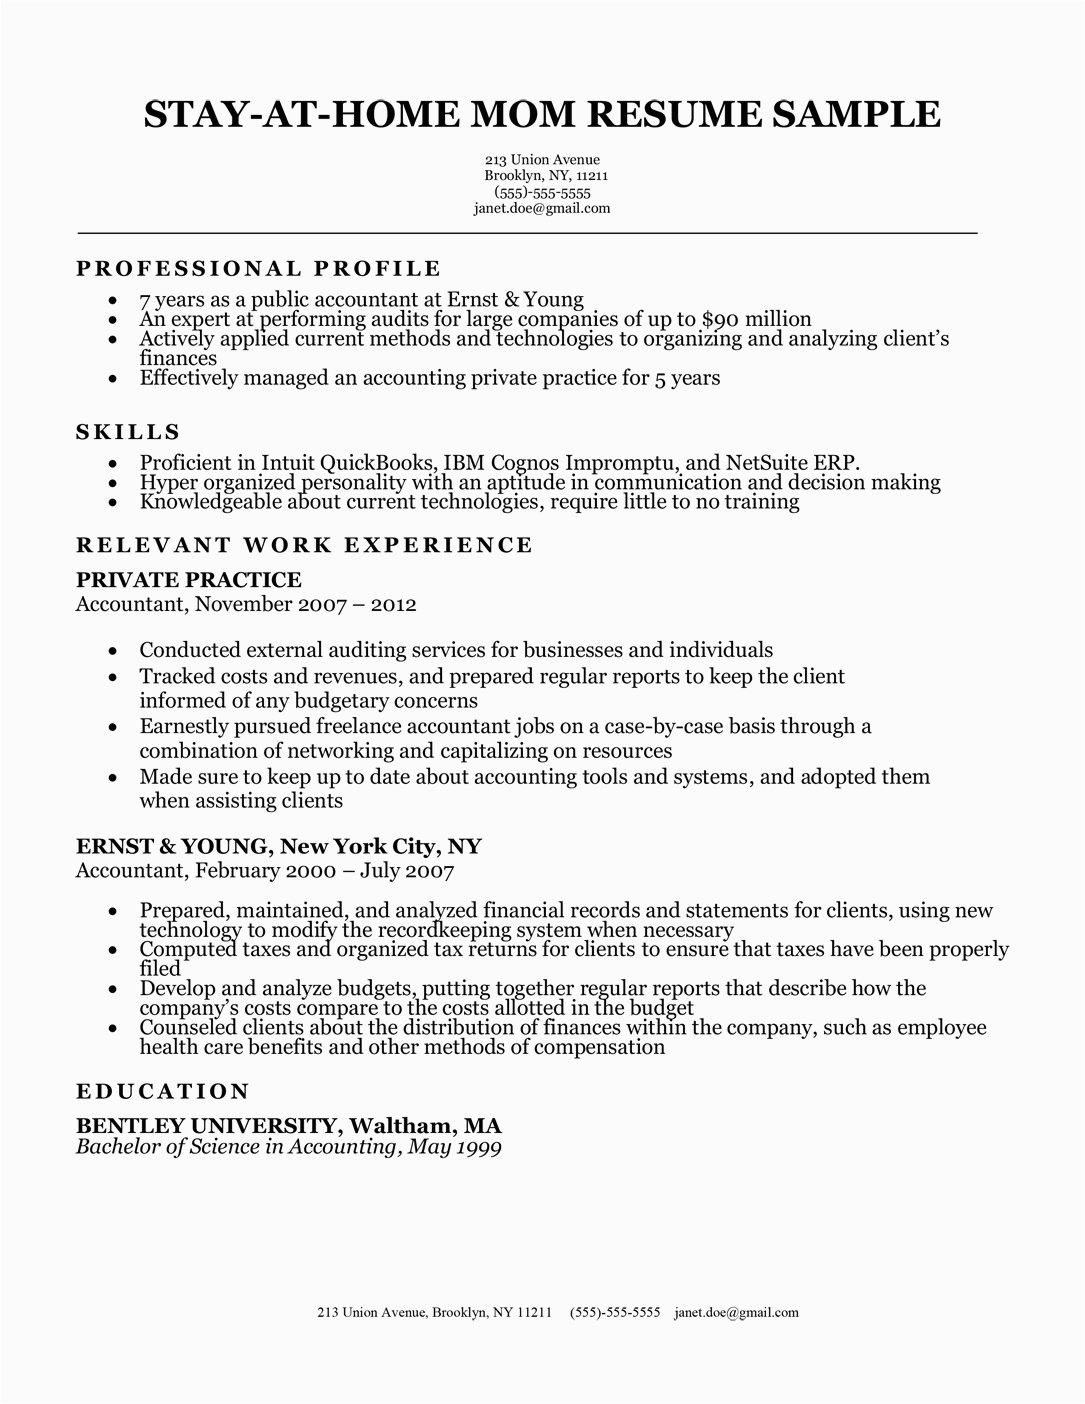 Free Stay at Home Mom Resume Template Stay at Home Mom Resume Sample & Writing Tips